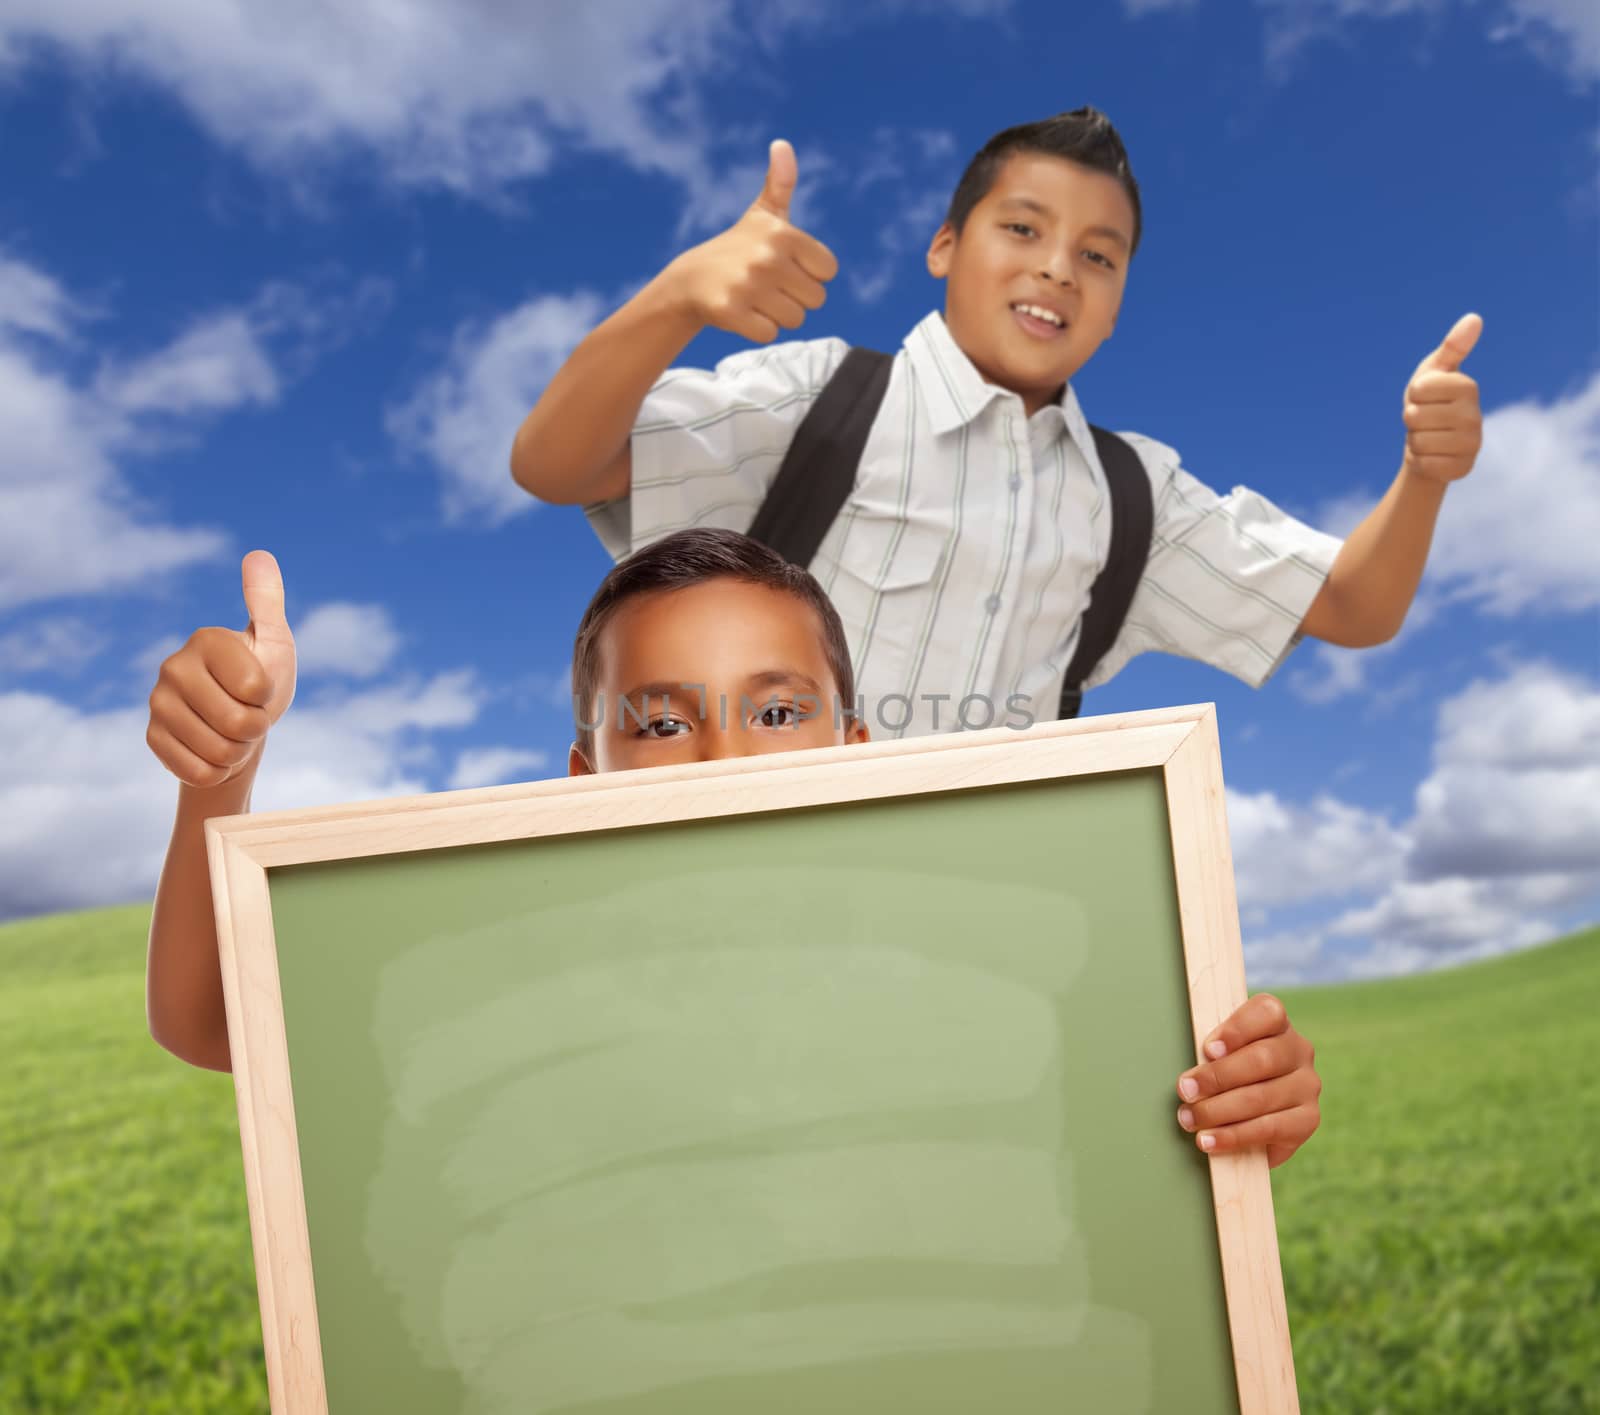 Hispanic Students with Thumbs Up in Grass Field Holding Blank Chalk Board. by Feverpitched